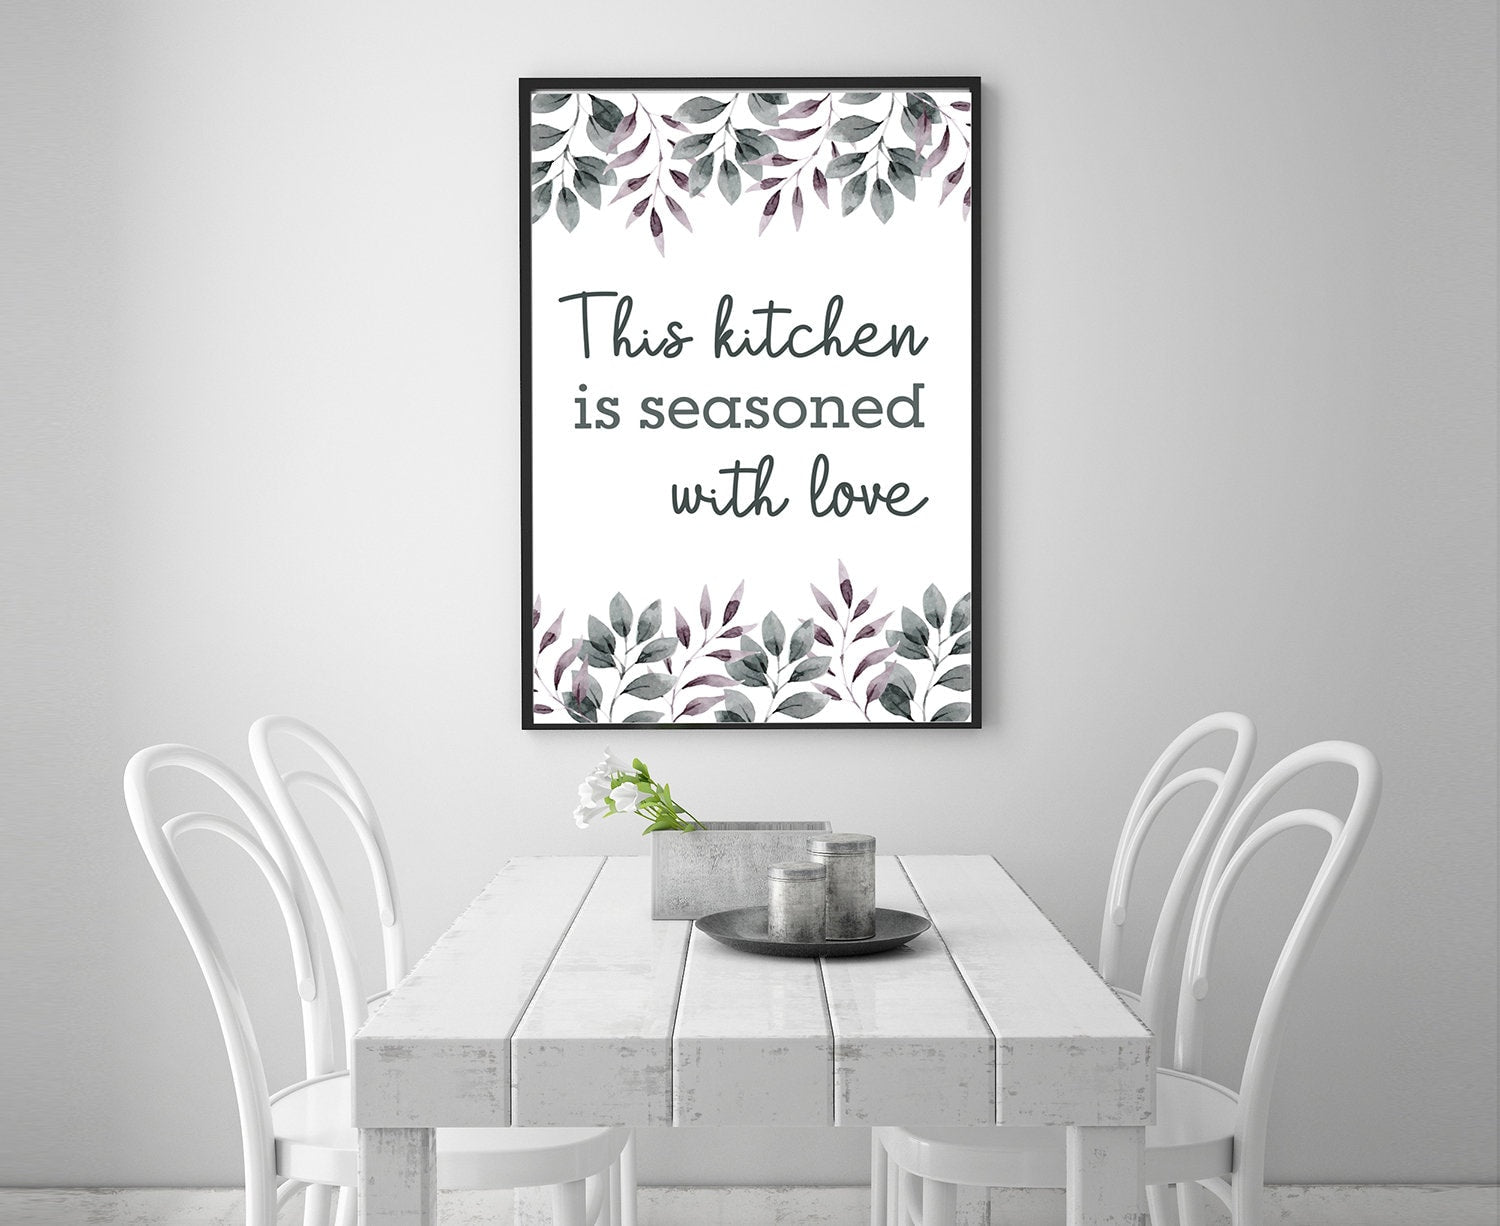 This Kitchen is Seasoned with Love, Family Quotes, Kitchen Quotes, Kitchen wall decoration, Living room wall art, Motivational Advice Poster